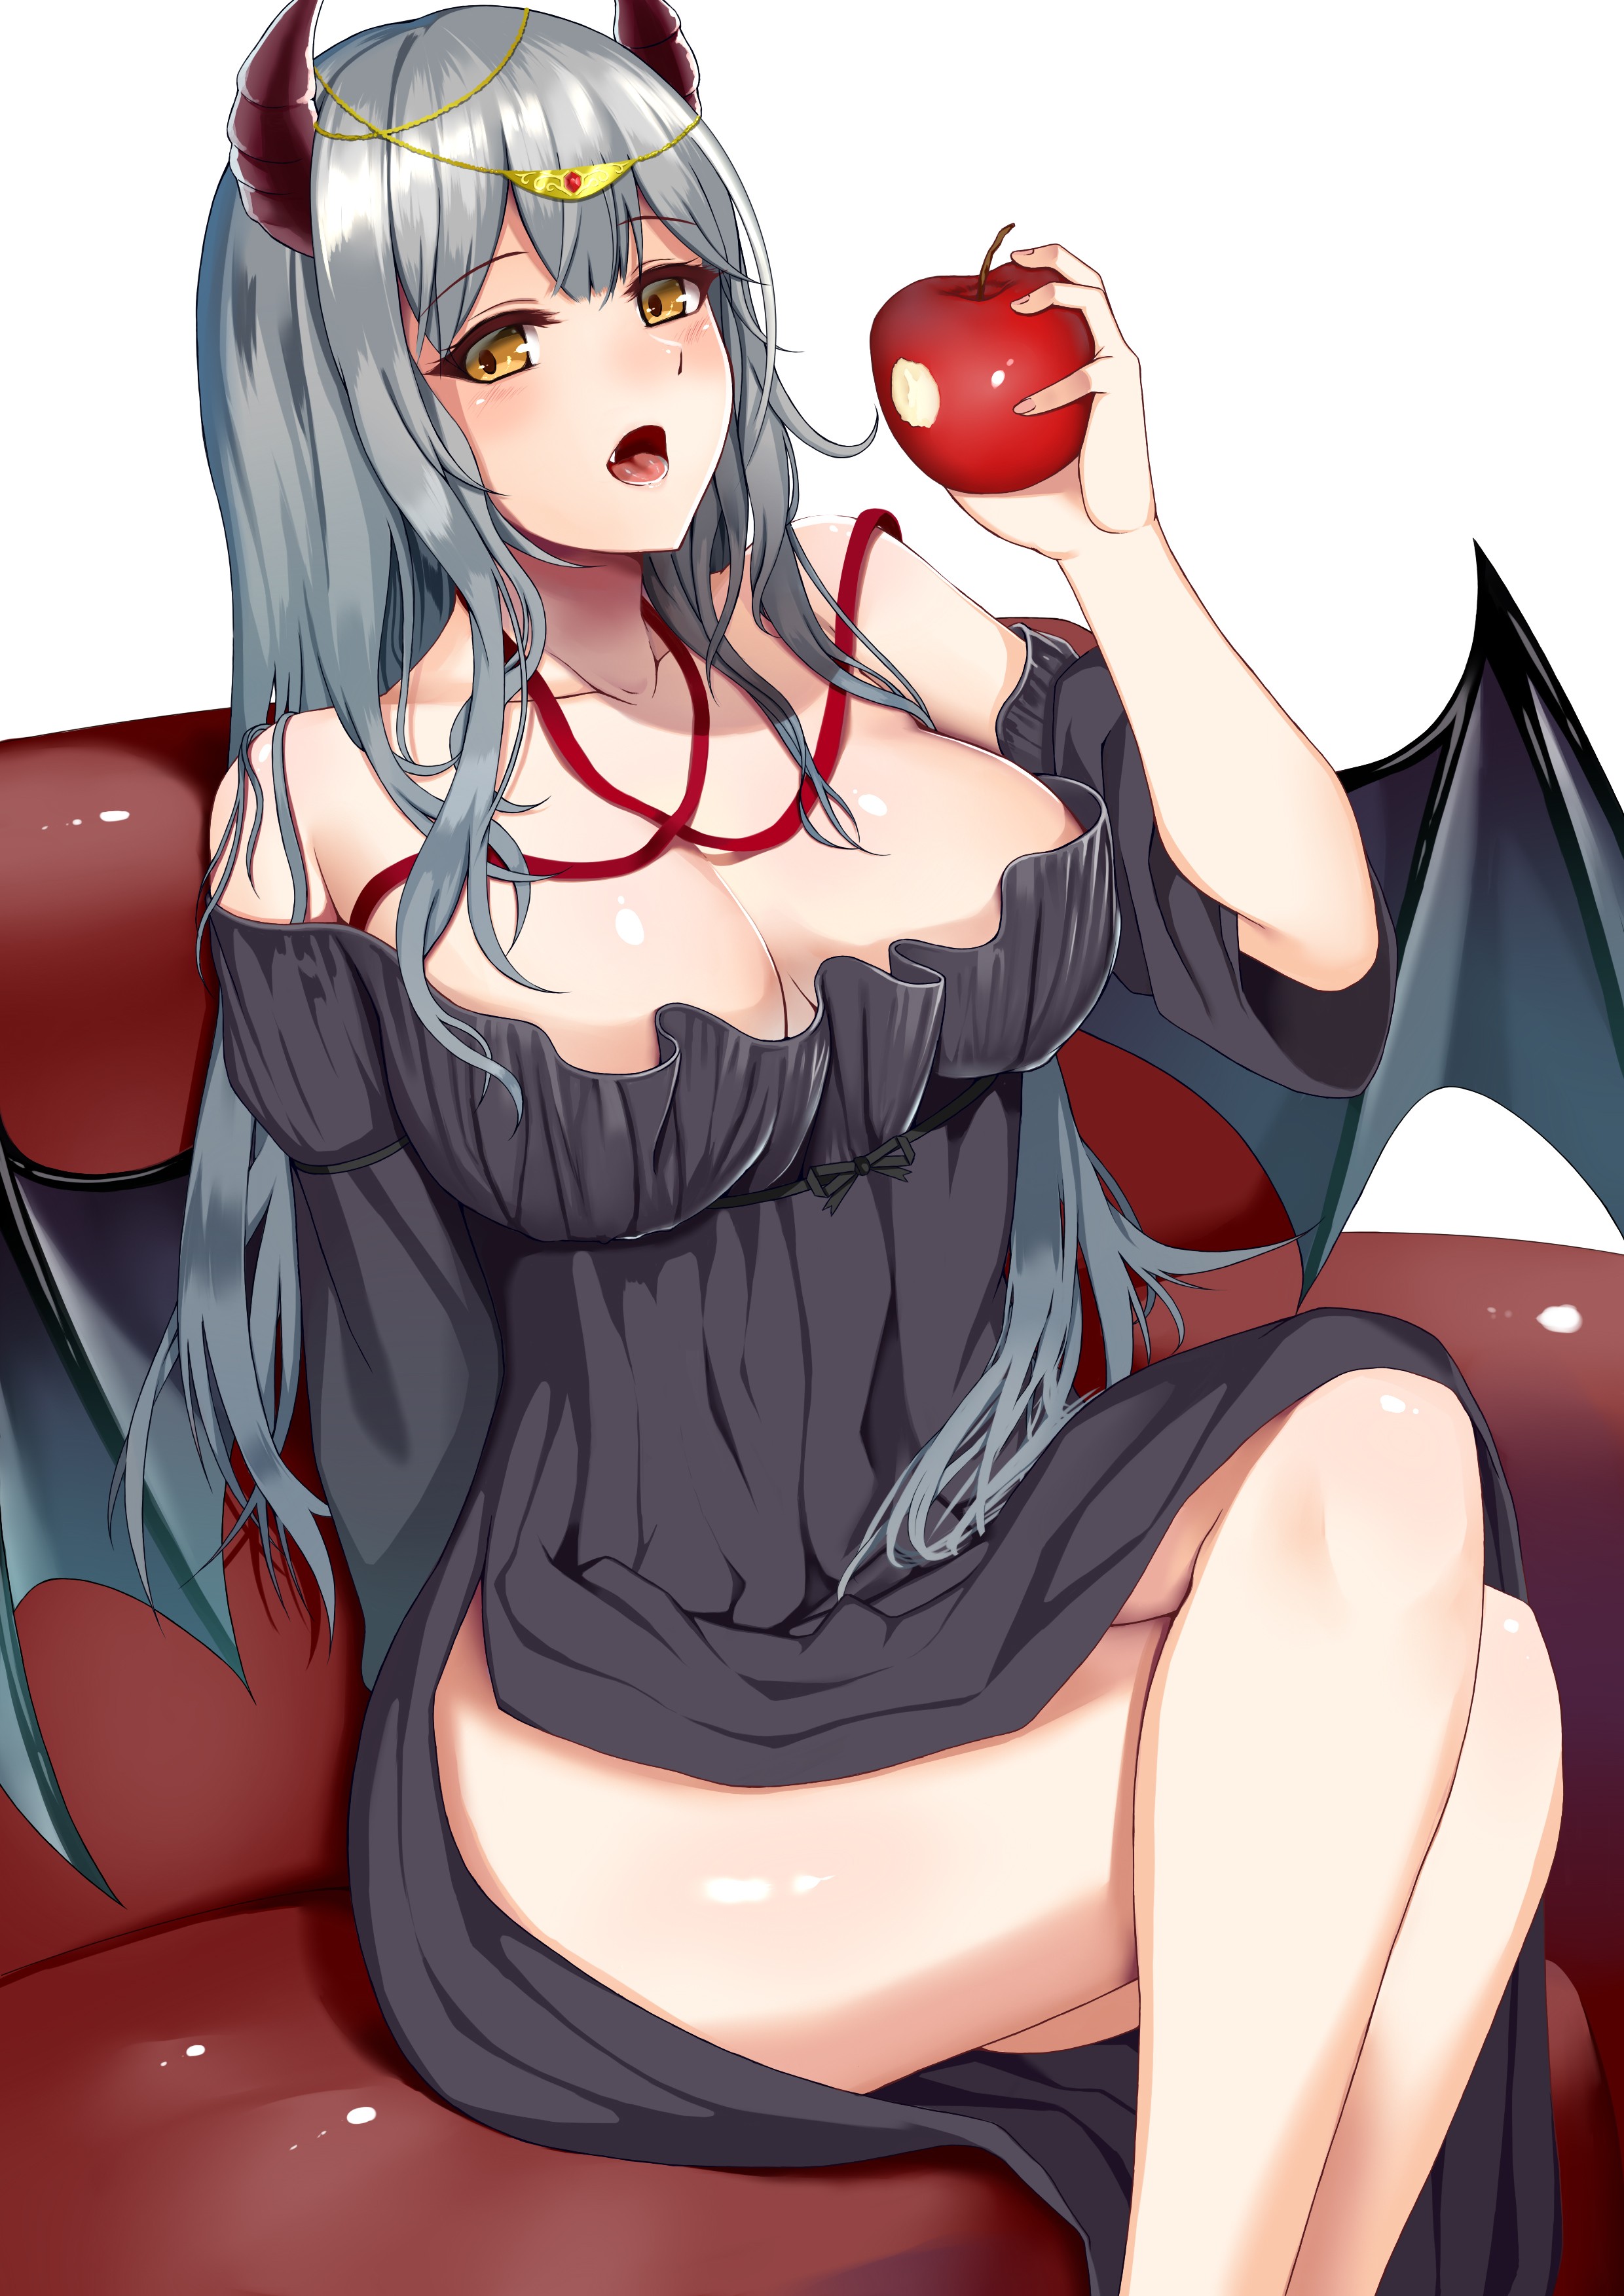 Anime 2480x3507 anime anime girls cleavage dress horns wings long hair Pixiv boobs big boobs curvy food fruit apples open mouth thighs black dress looking at viewer succubus legs legs crossed sitting portrait display